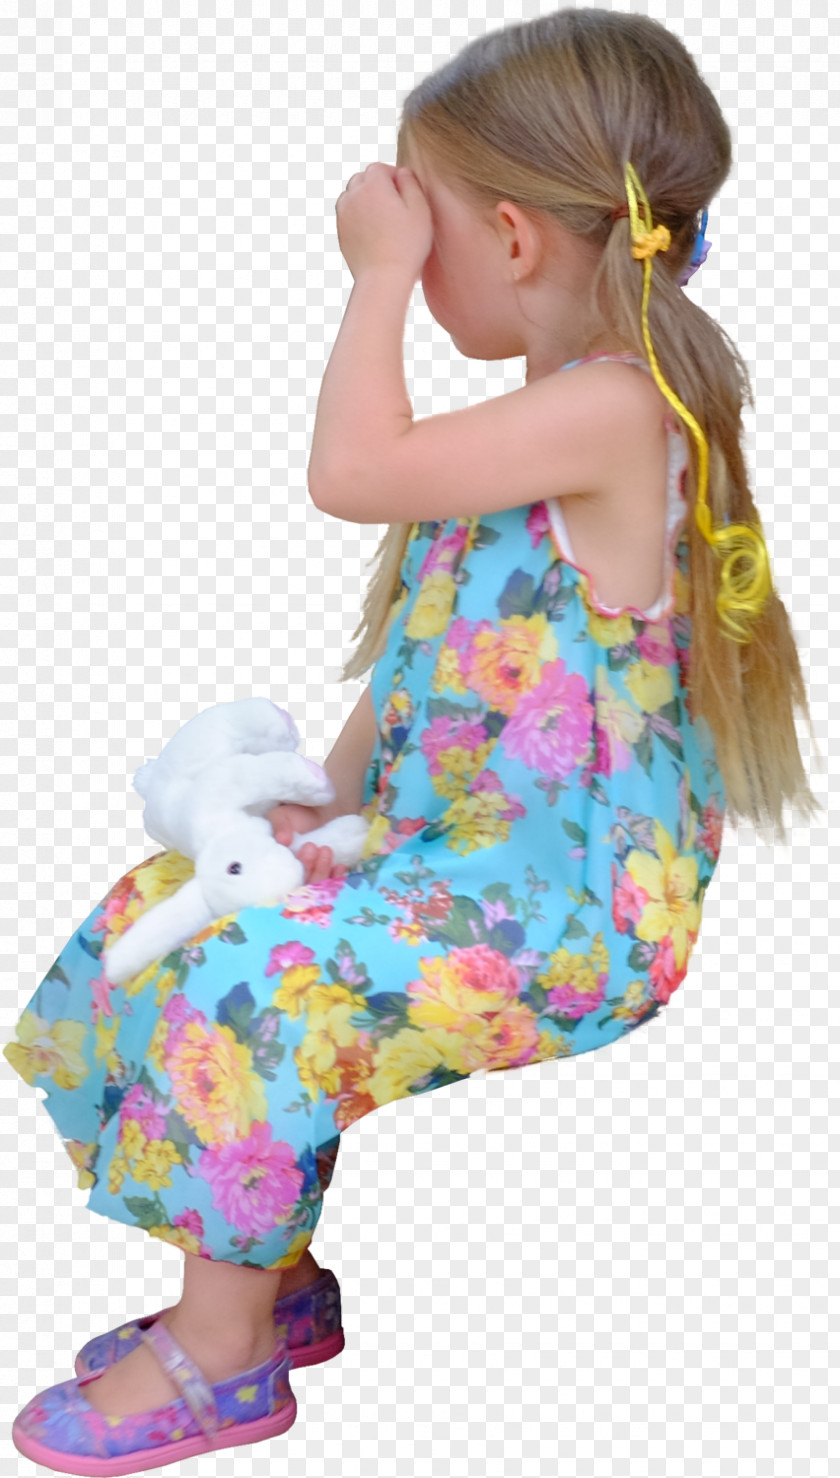 Child Toddler Creativity PNG